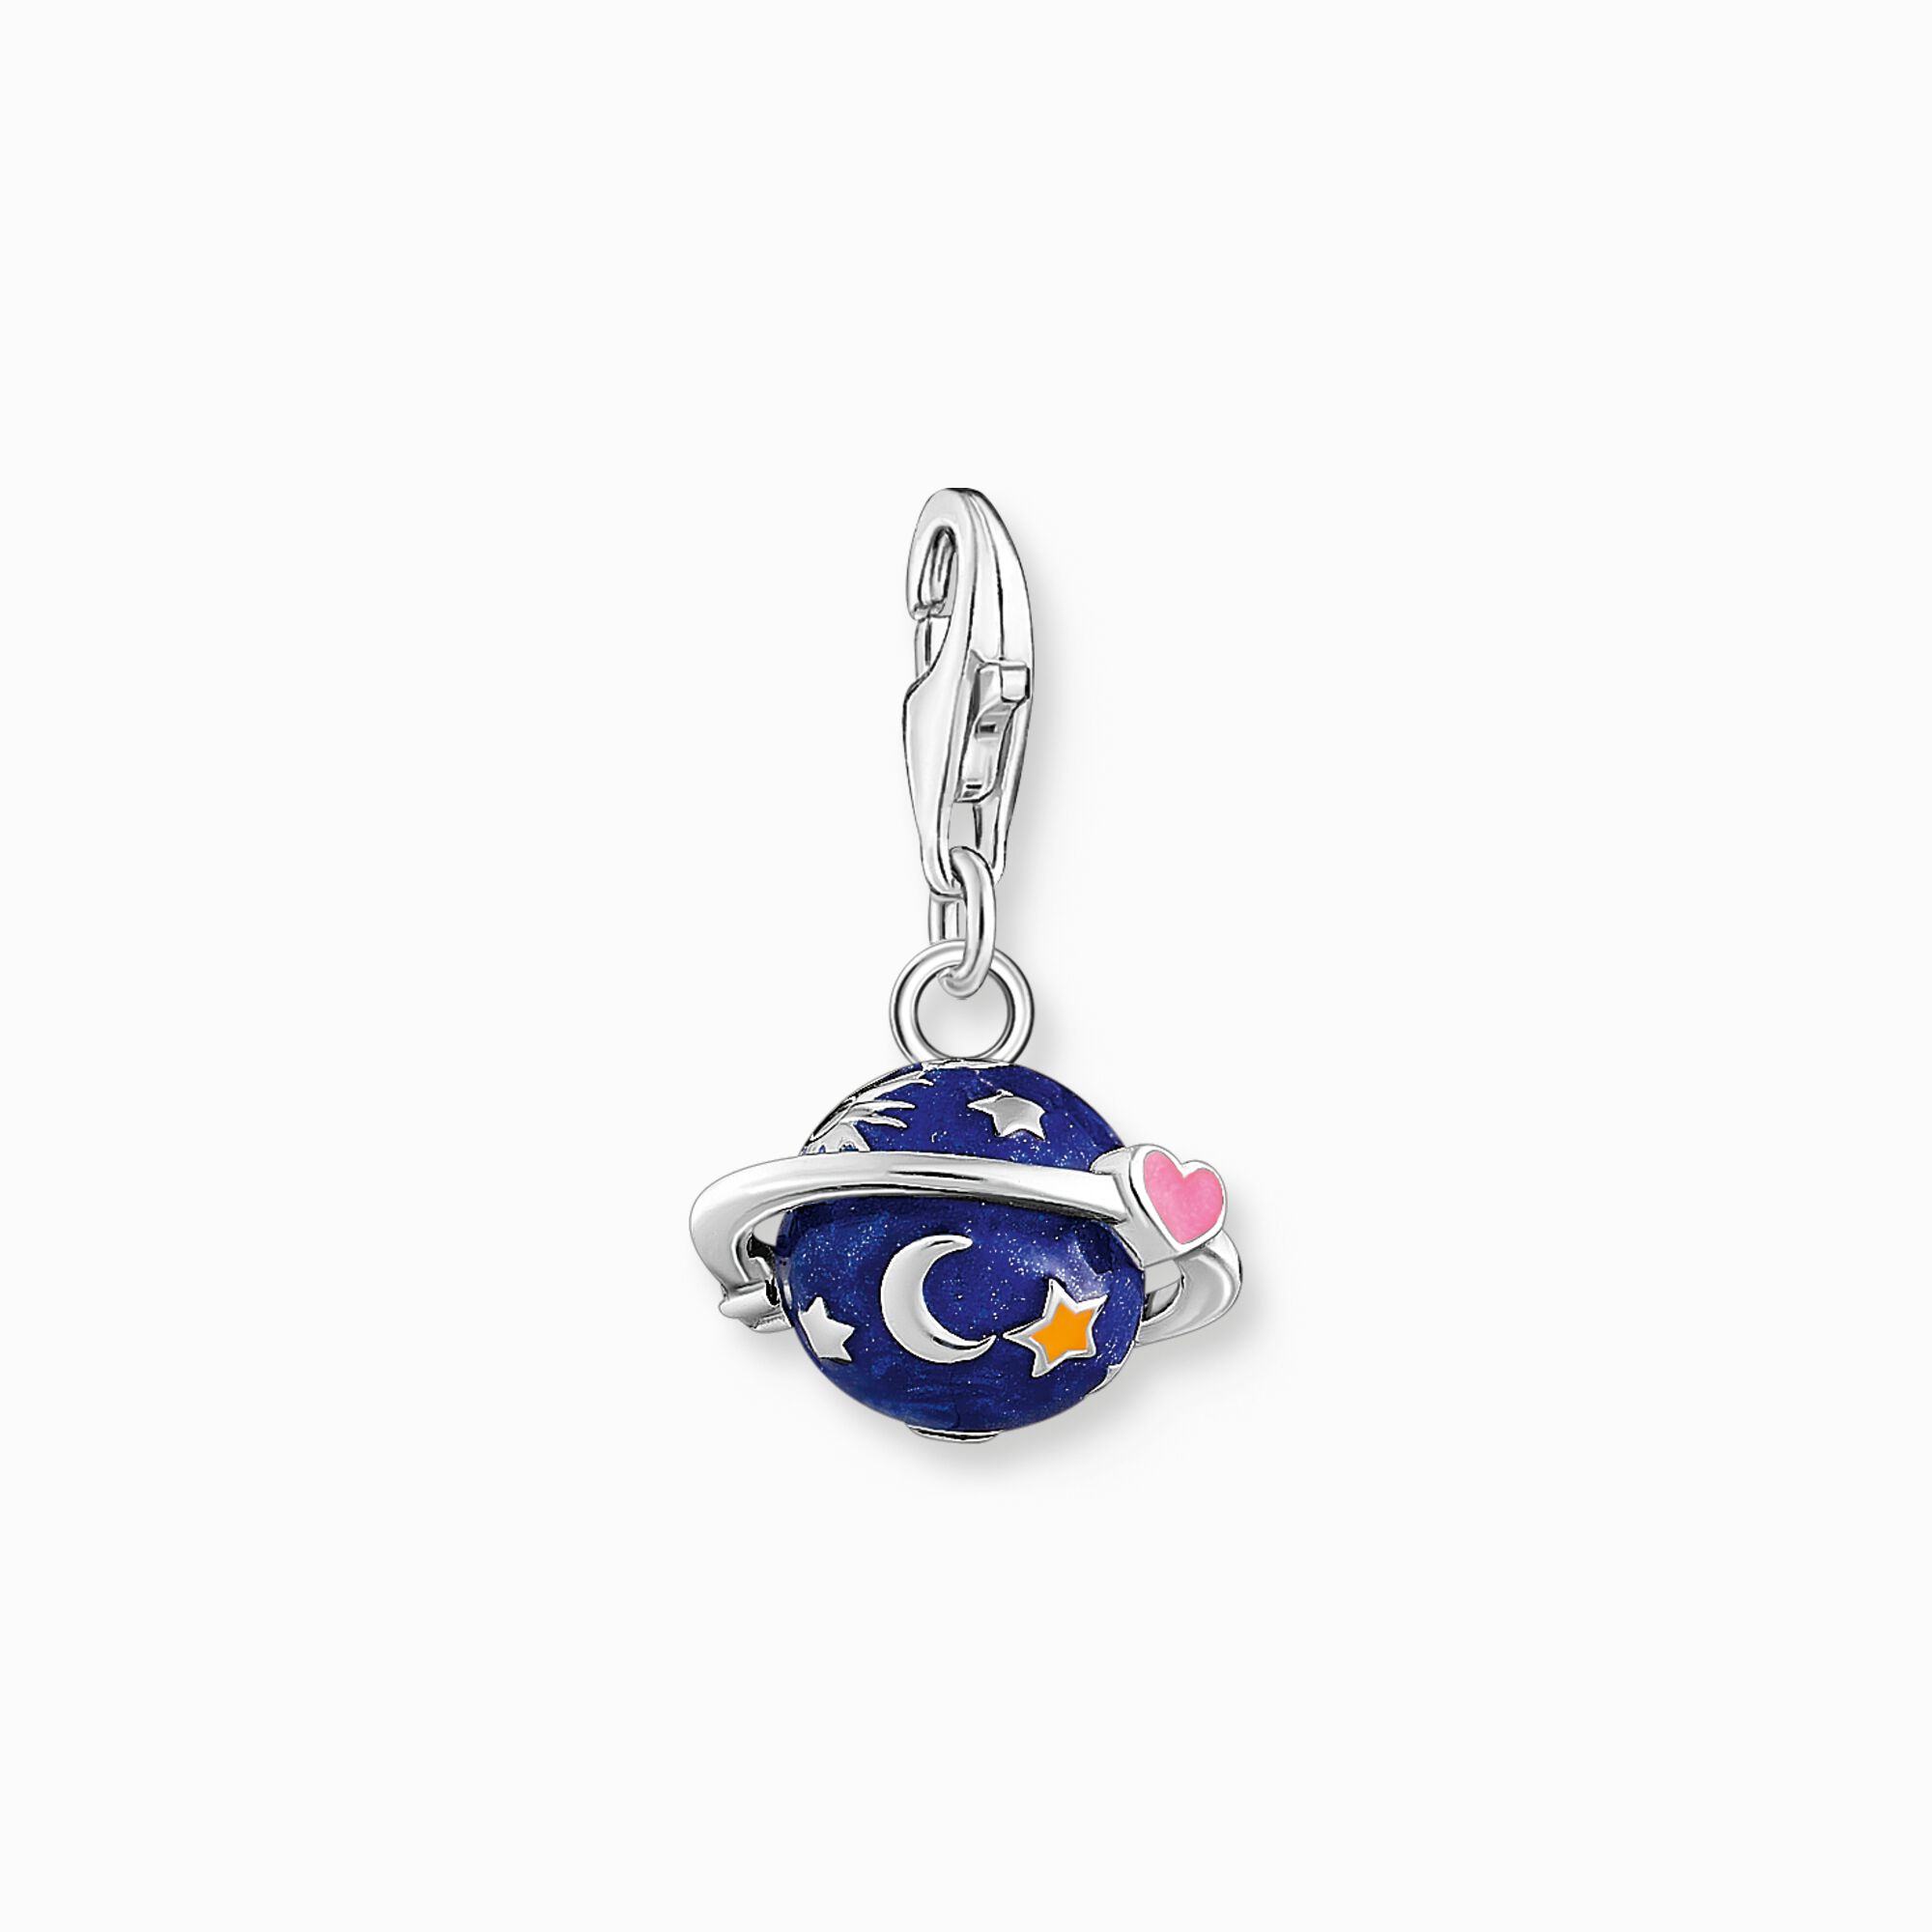 Charm pendant Saturn with dark blue cold enamel and fine details silver from the Charm Club collection in the THOMAS SABO online store